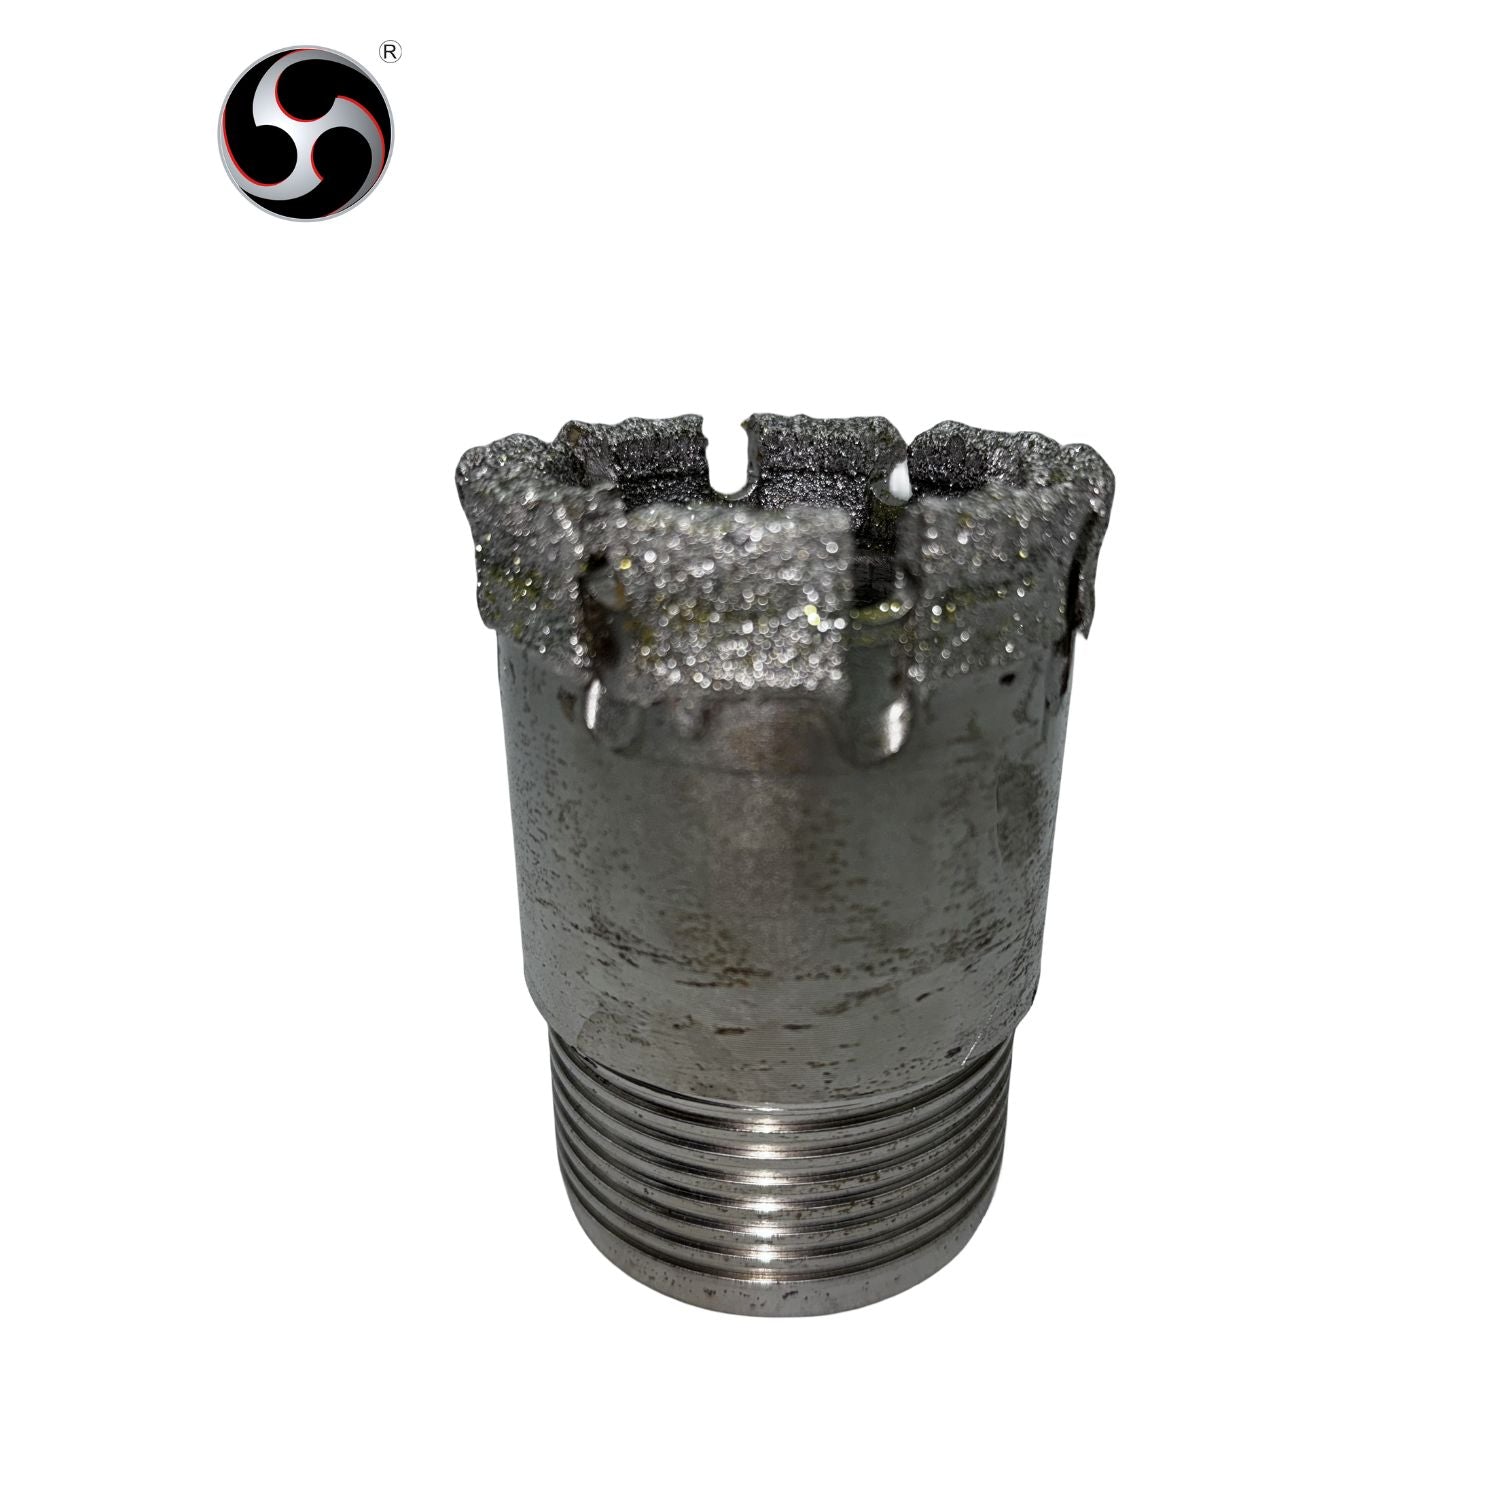 Electroplated Diamond Core Bit For Water Well Drilling And Hard Rock Drilling